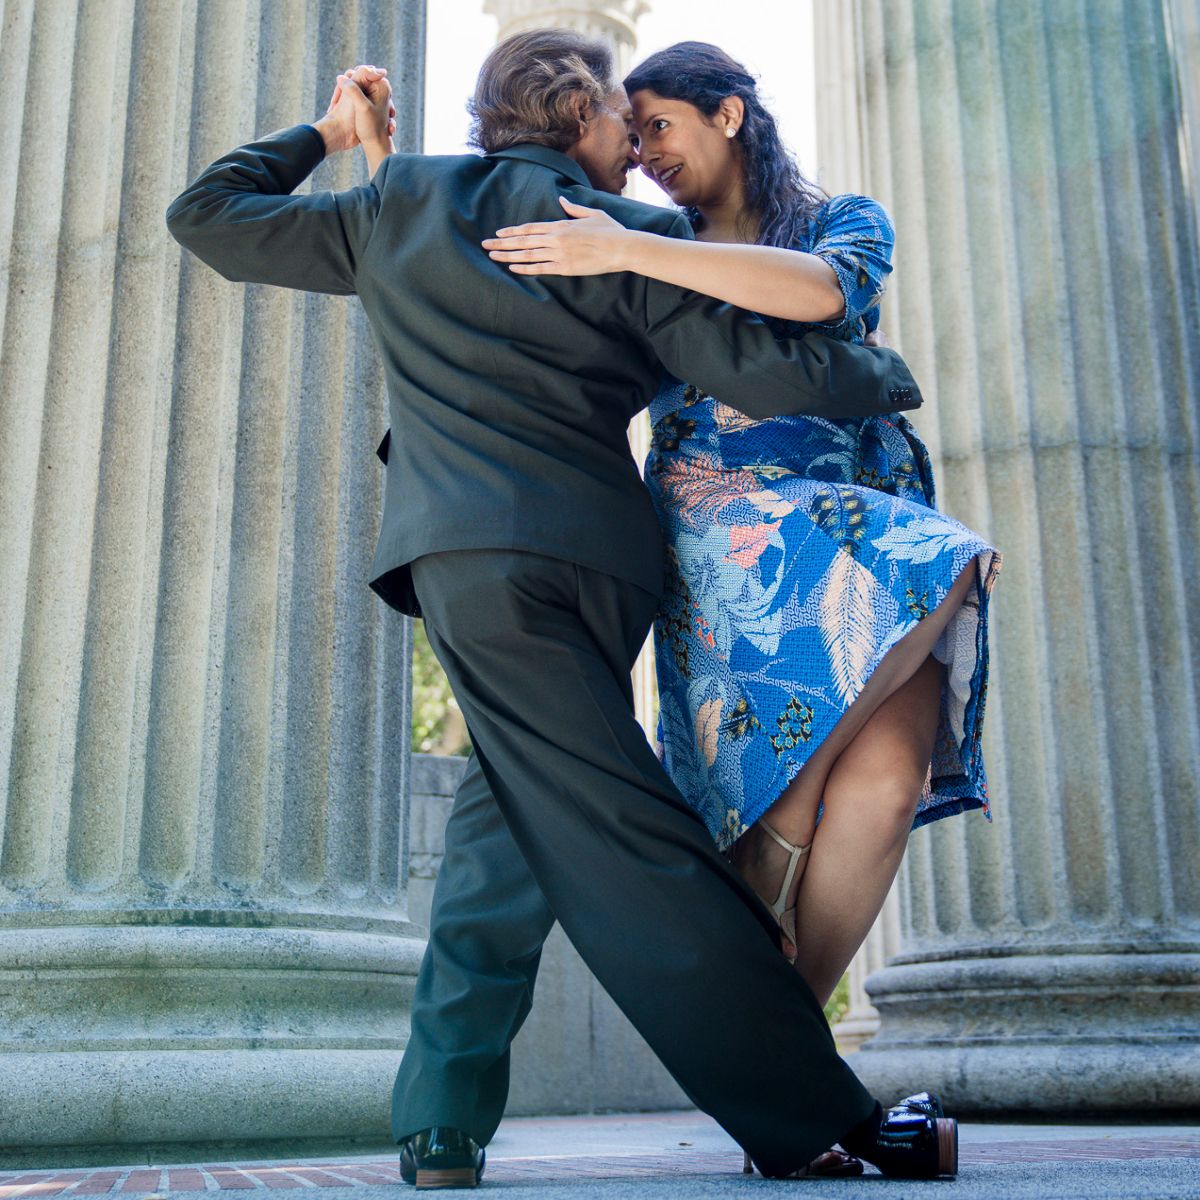 Argentine Tango dancing by Marcelo Solis and Mimi at Pulgas Water Temple in San Francisco. Marcelo wears a green olive suit and Mimi a blue dress with patterns